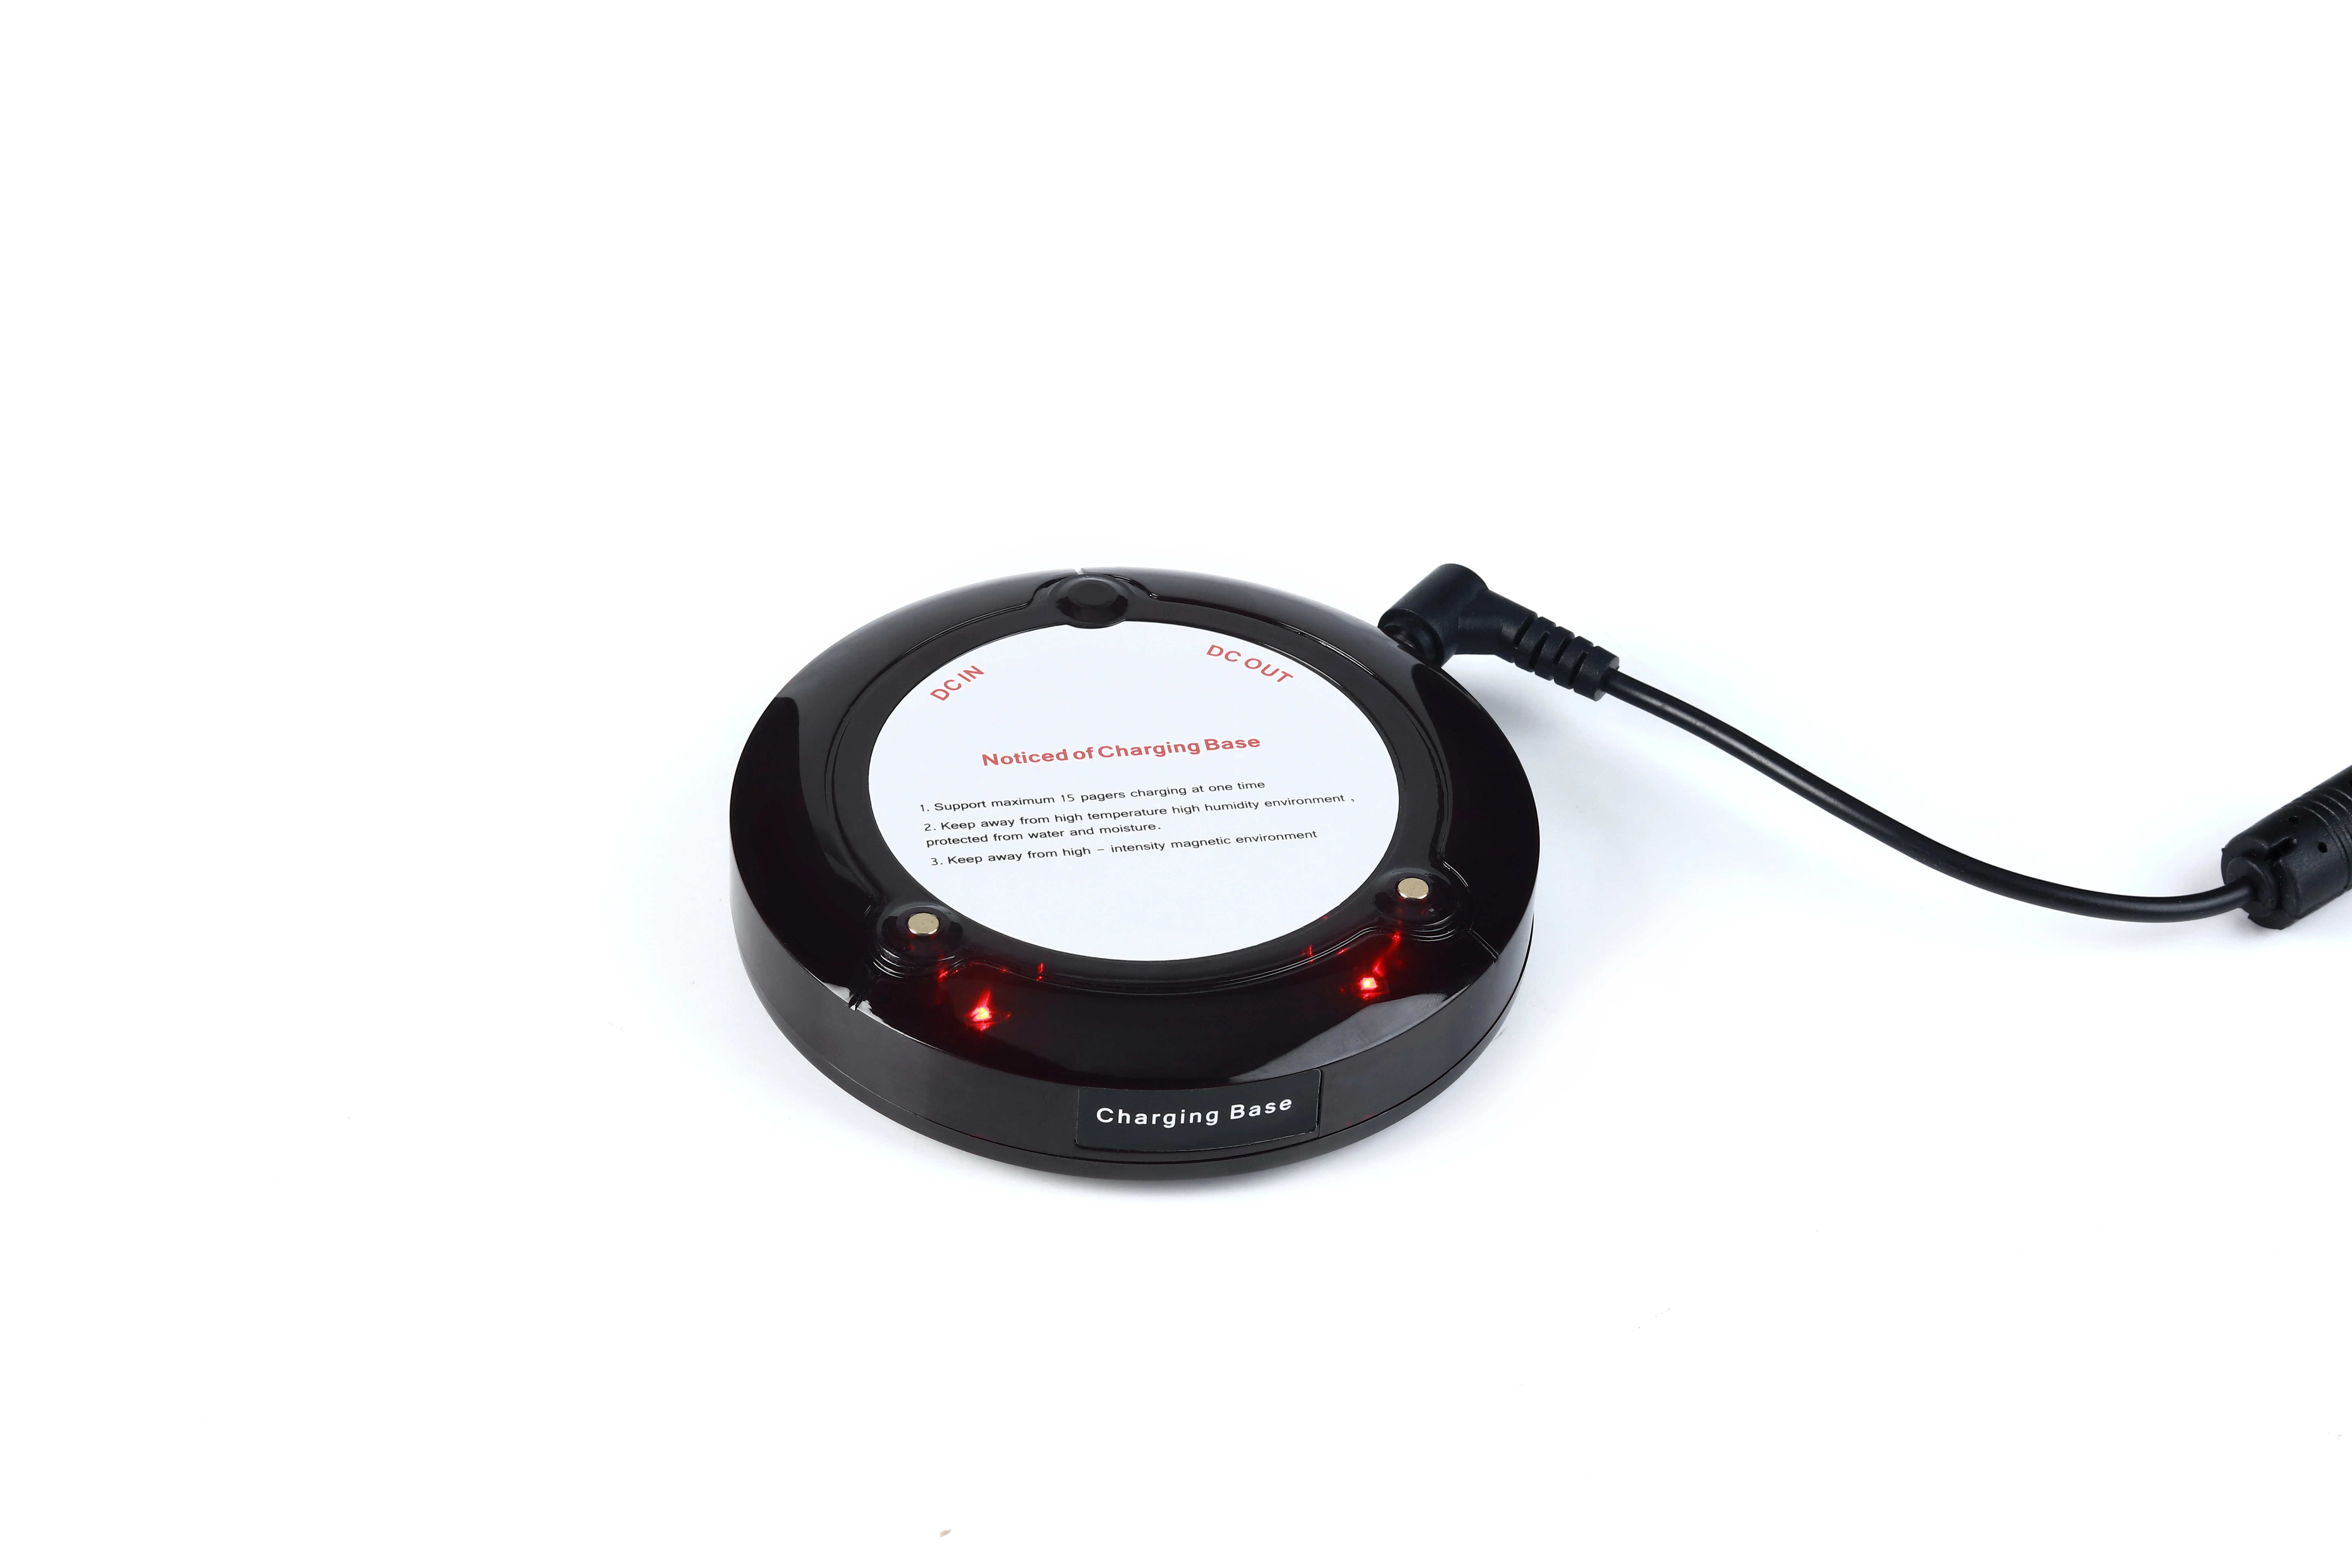 Wireless paging system for fast food restaurant cafe queue catering pager device